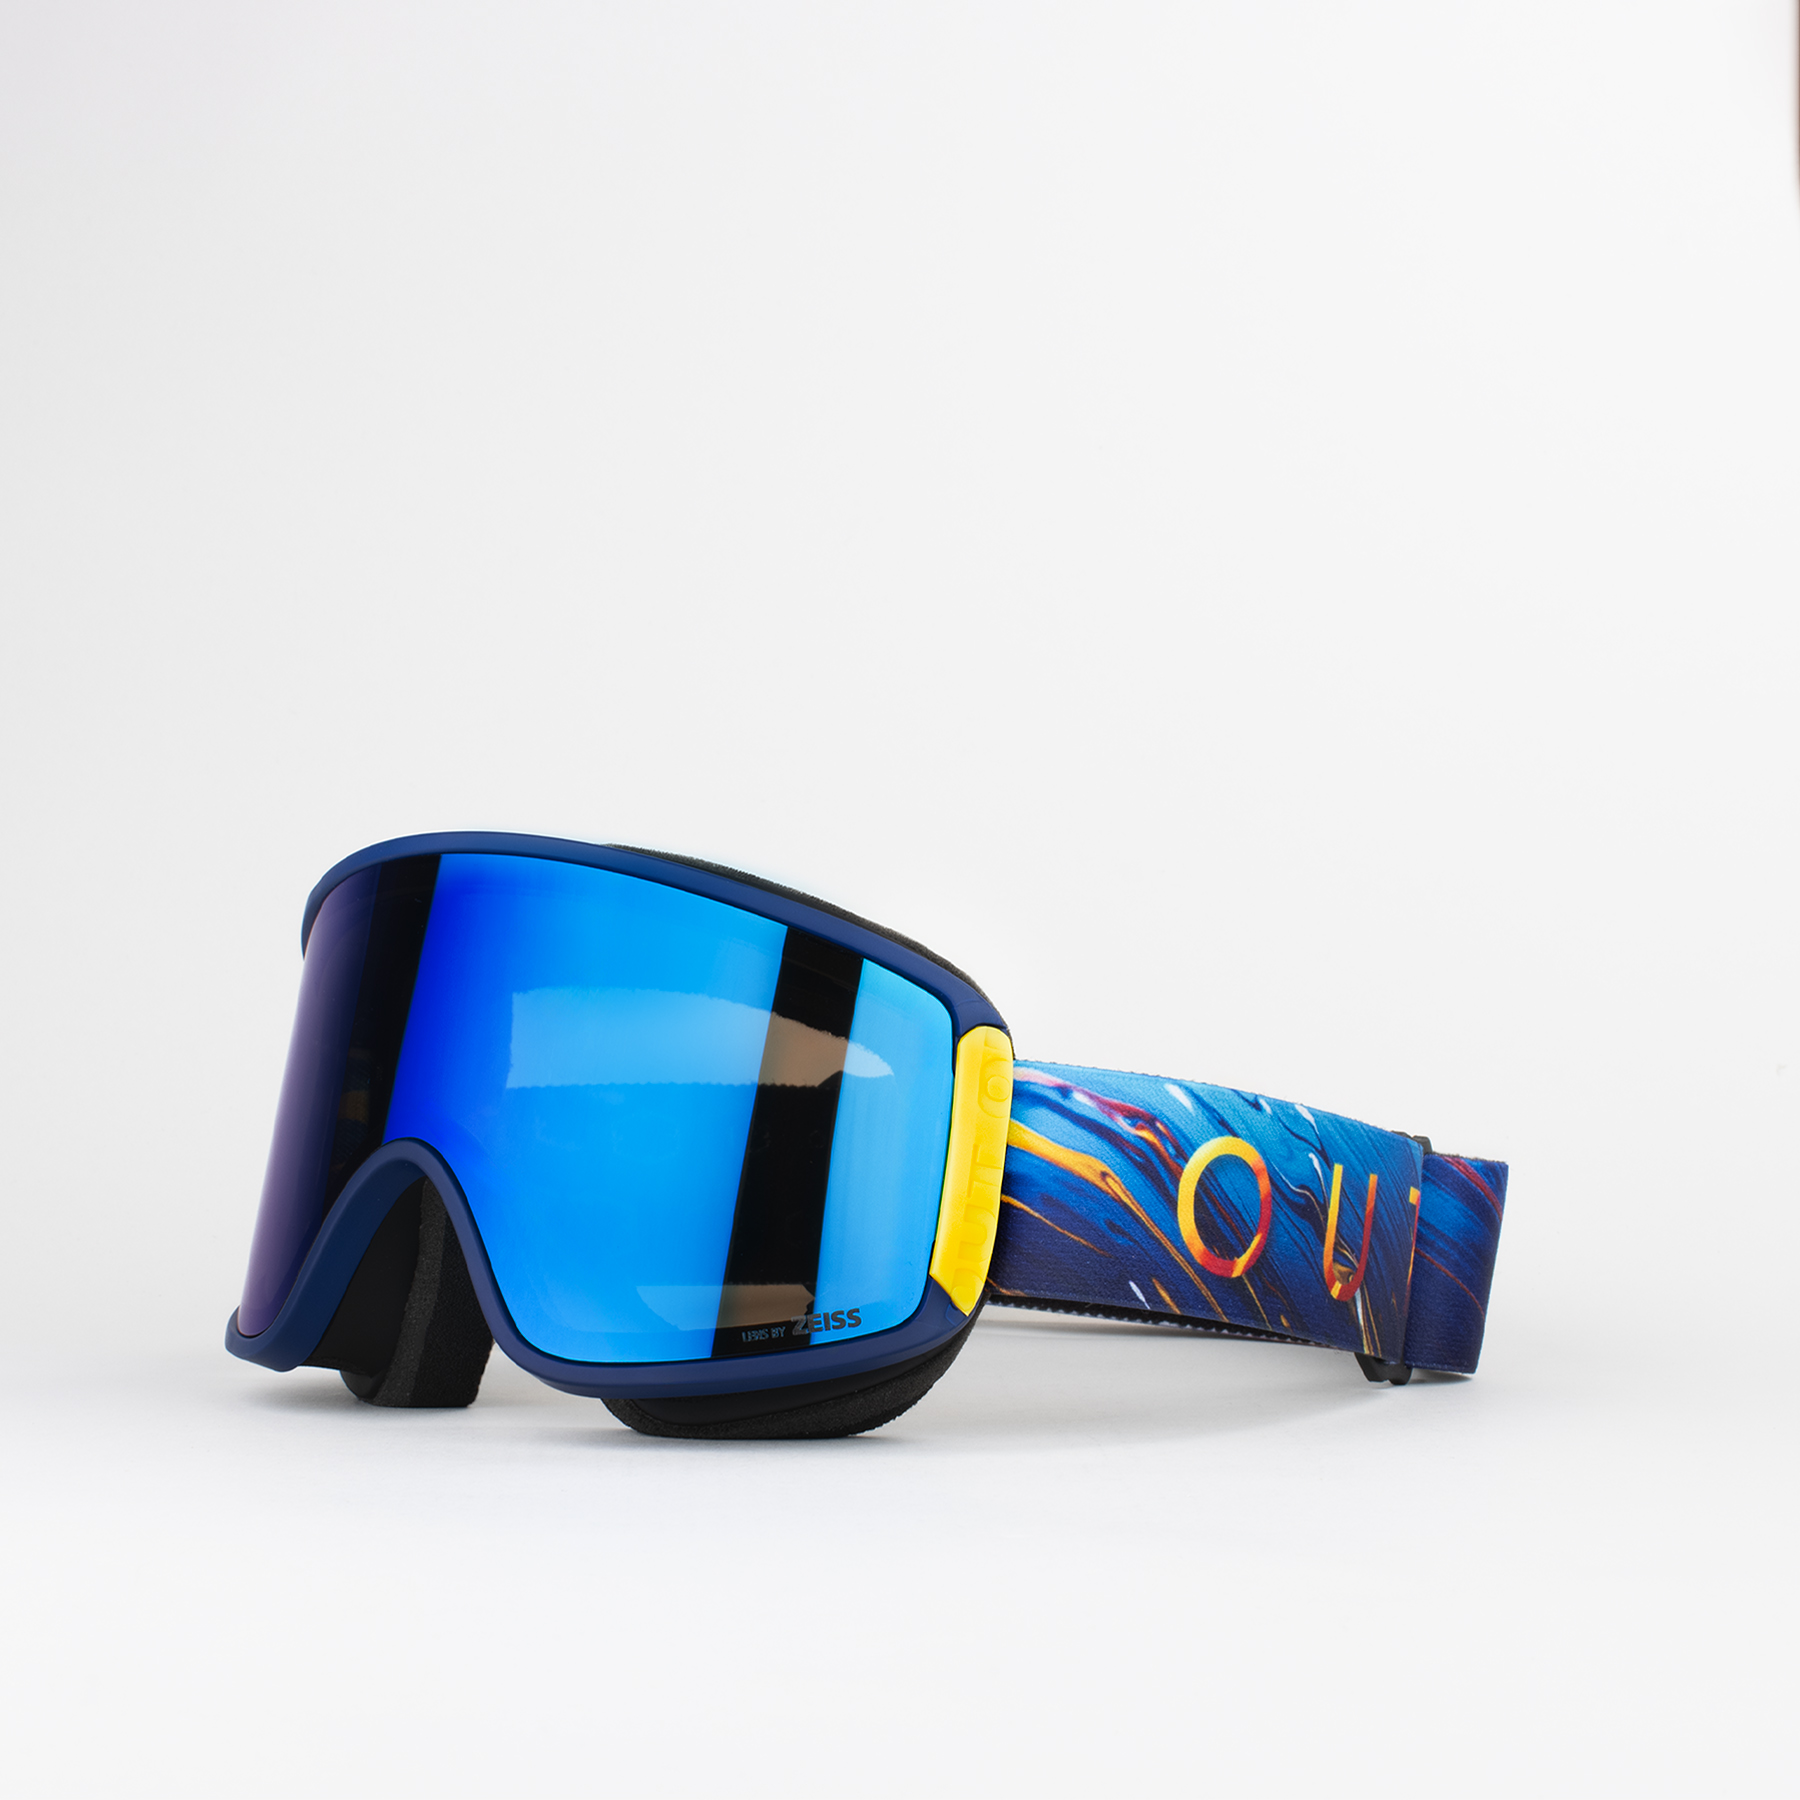 Shift Atmosphere snow goggle with Blue MCI lens and Storm bonus lens